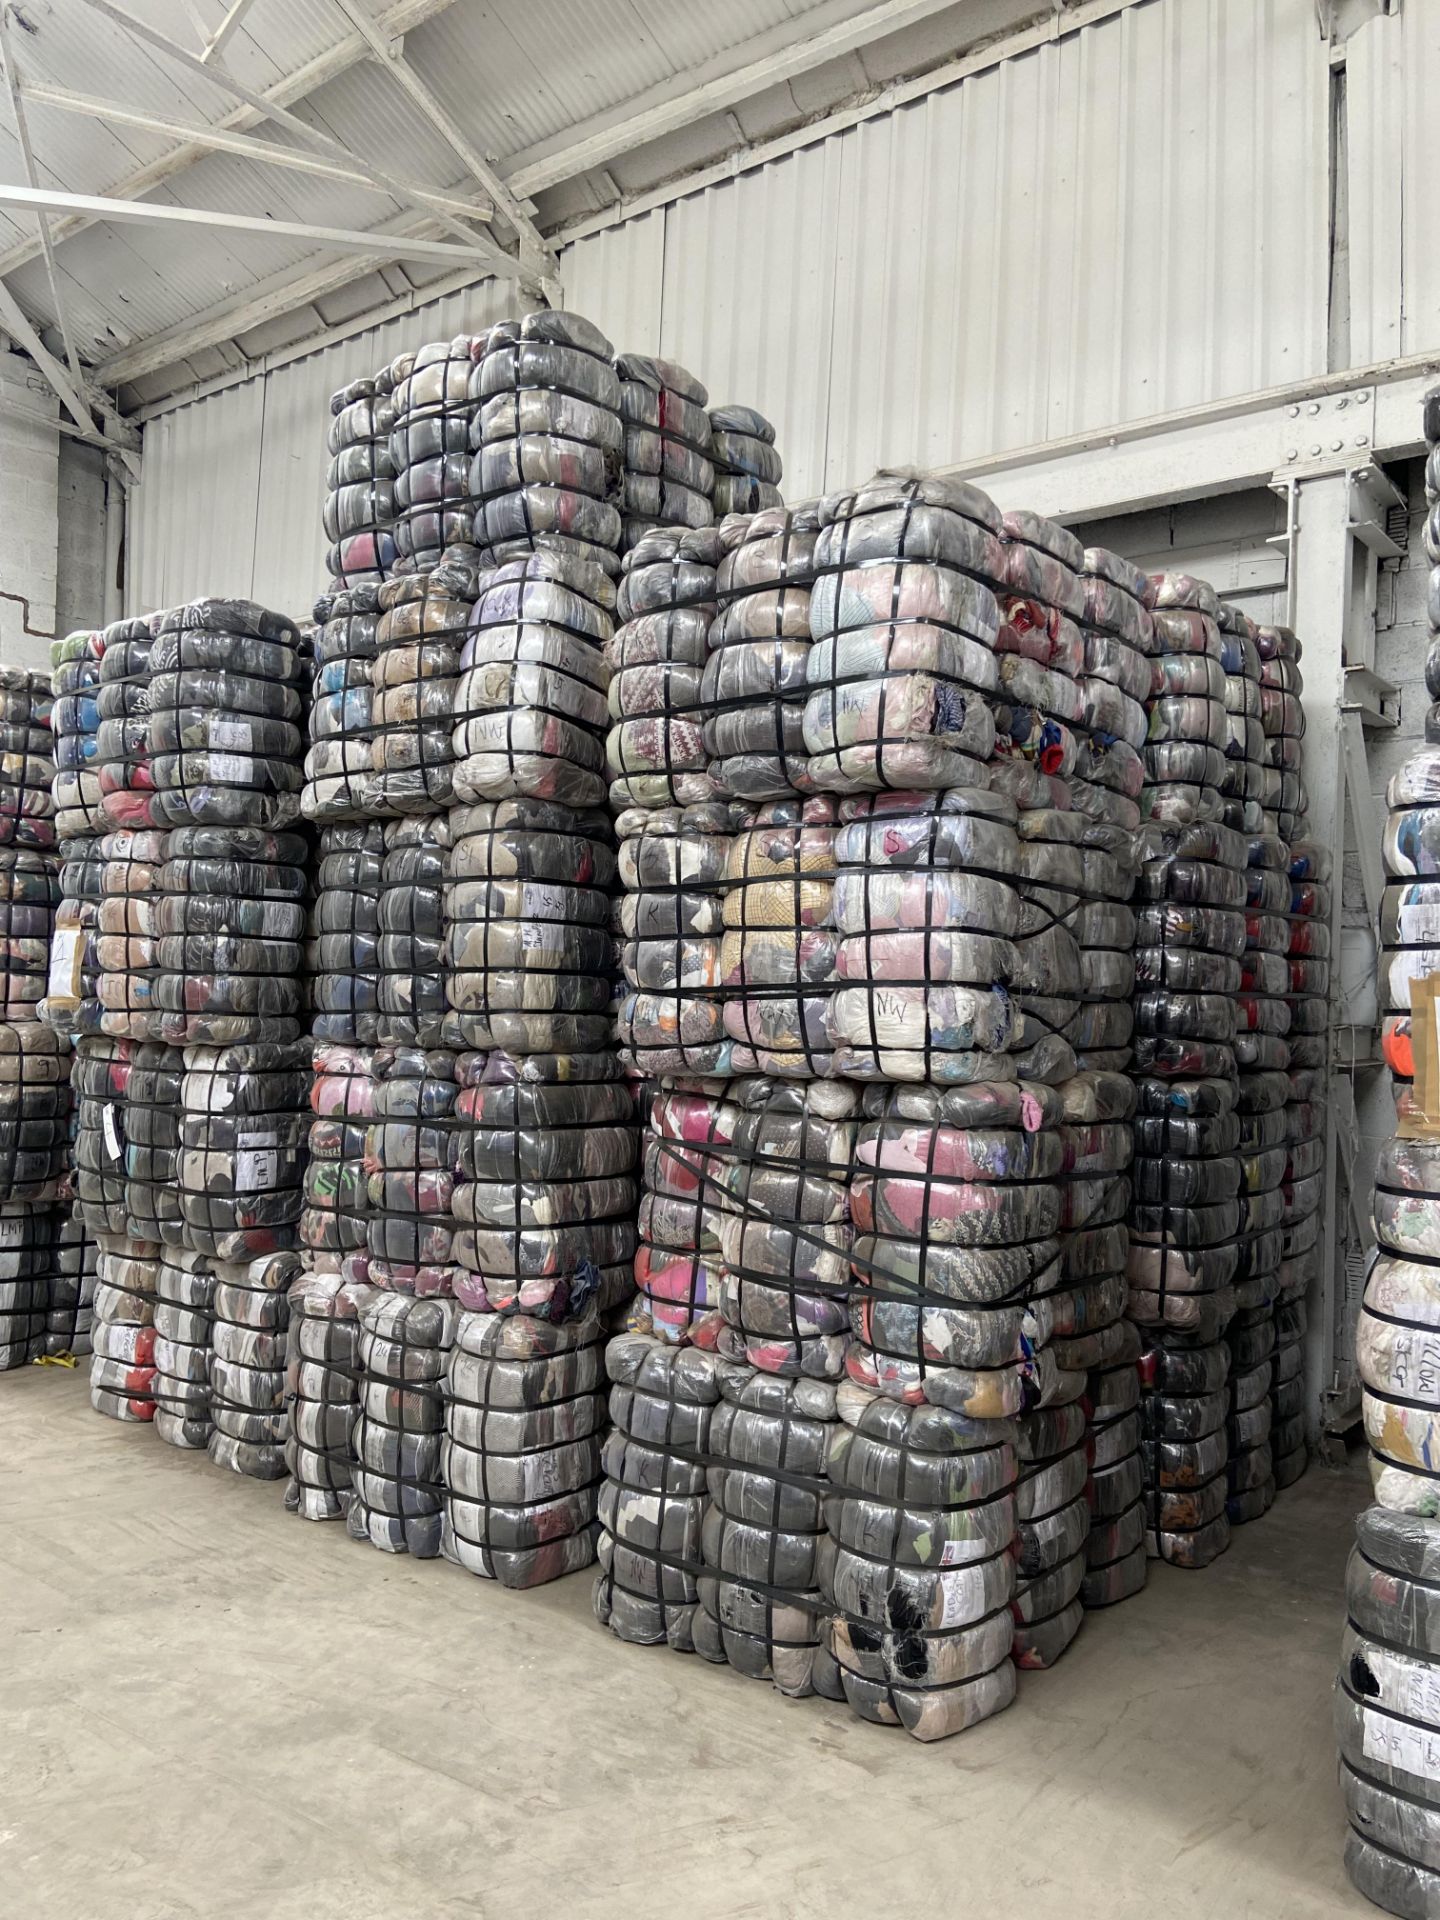 APPROX 197 BALES (8865KG) RECYCLABLE WASTE TEXTILES, understood to comprise: Three bales x 45kg - Bild 2 aus 8